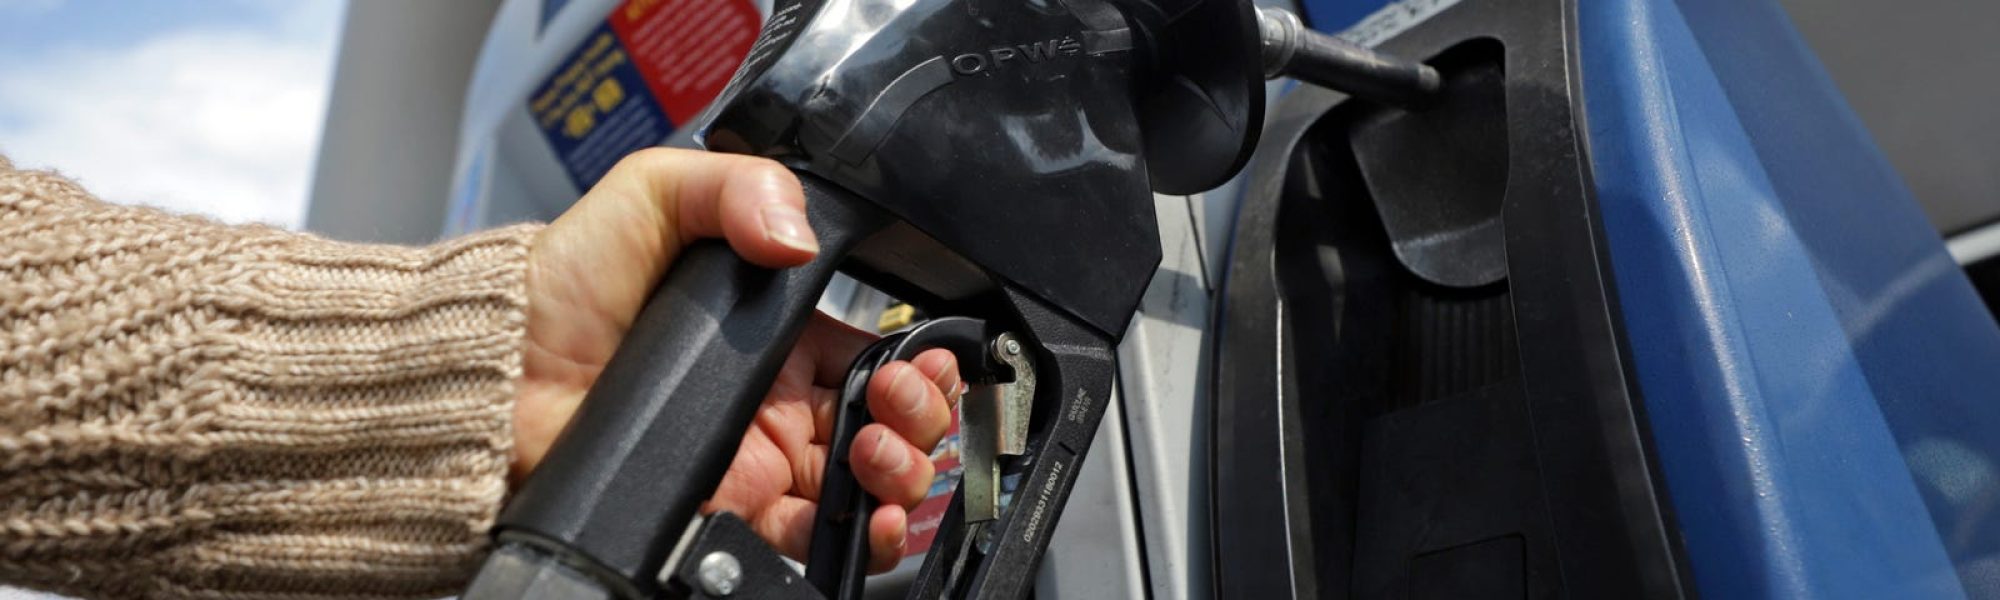 Michigan average gas prices up 13 cents to $3.32, could continue to climb higher